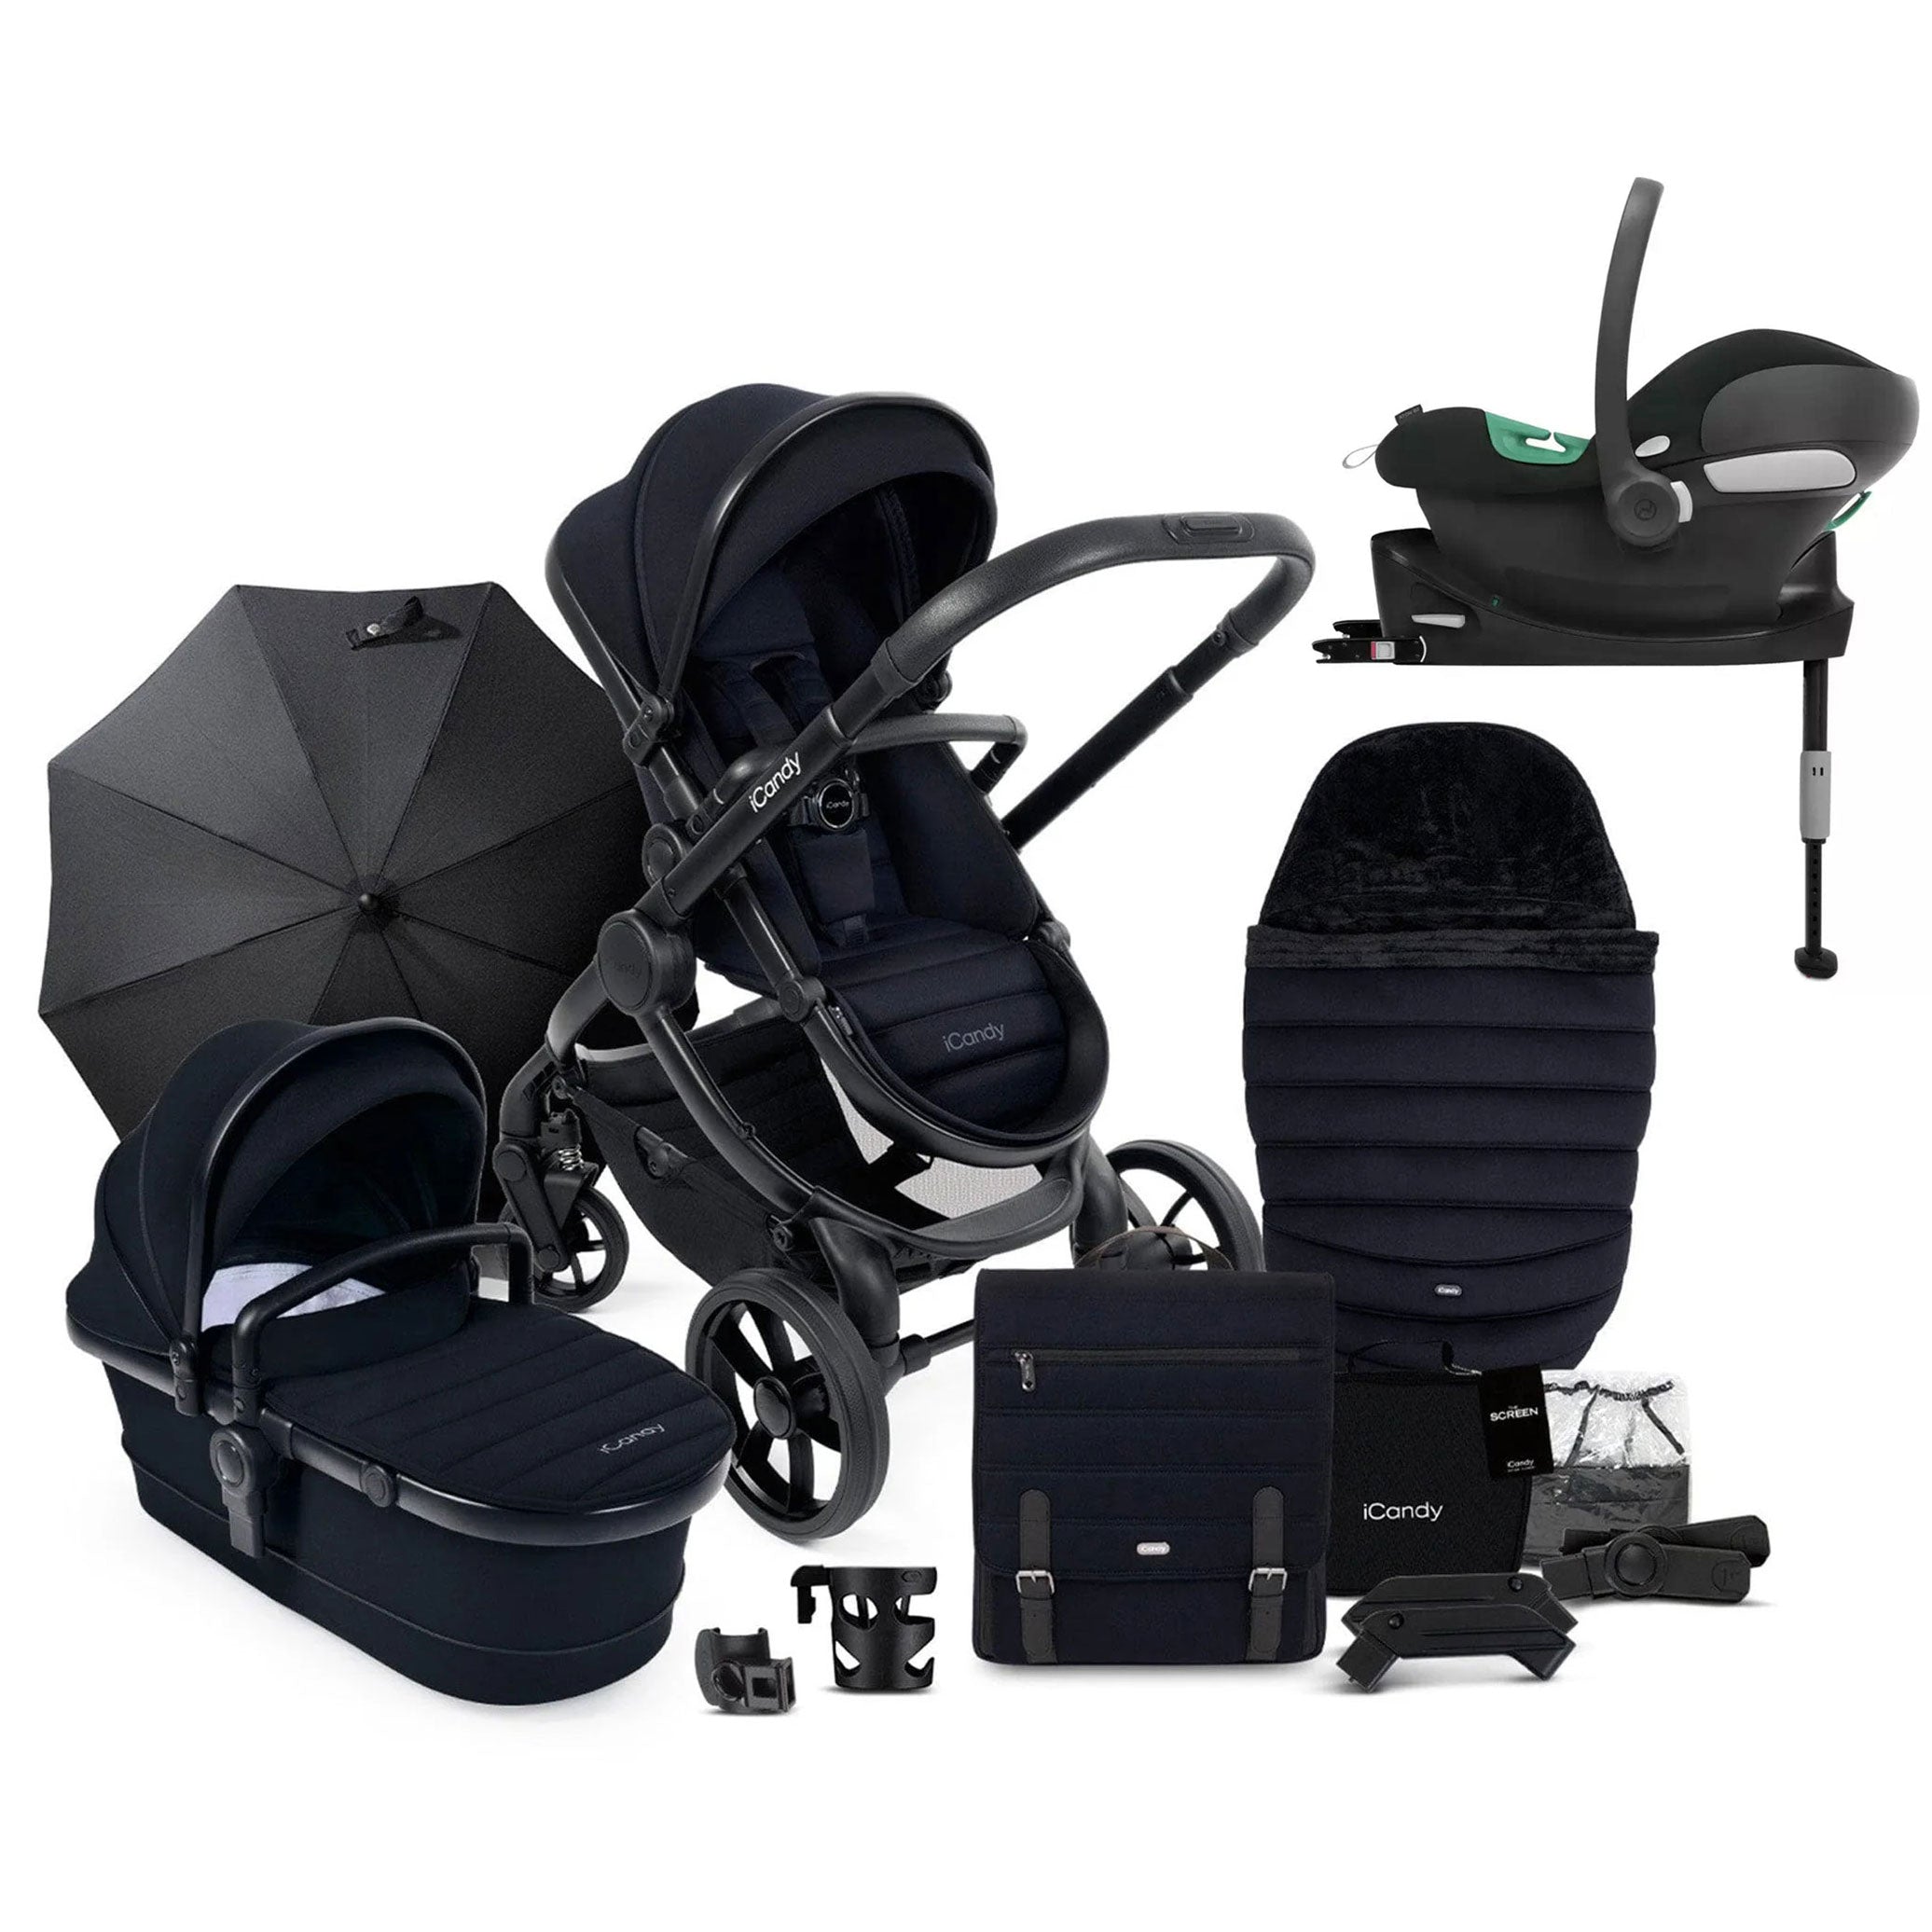 iCandy Peach 7 Complete Cybex Bundle in Black